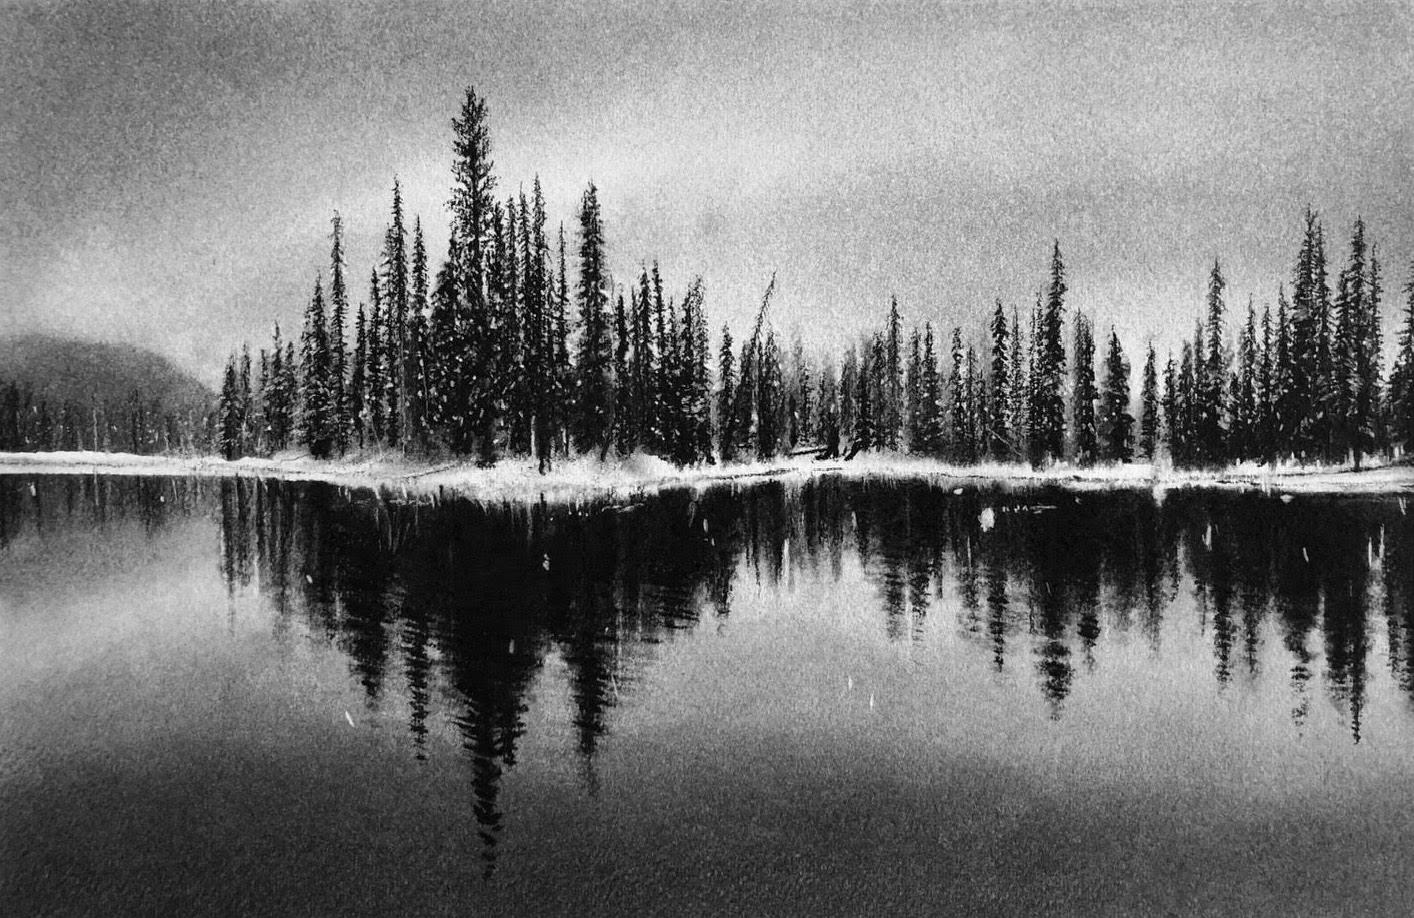 Katherine Curci Figurative Art - Winter Reflections, black and white charcoal drawing of trees and lake